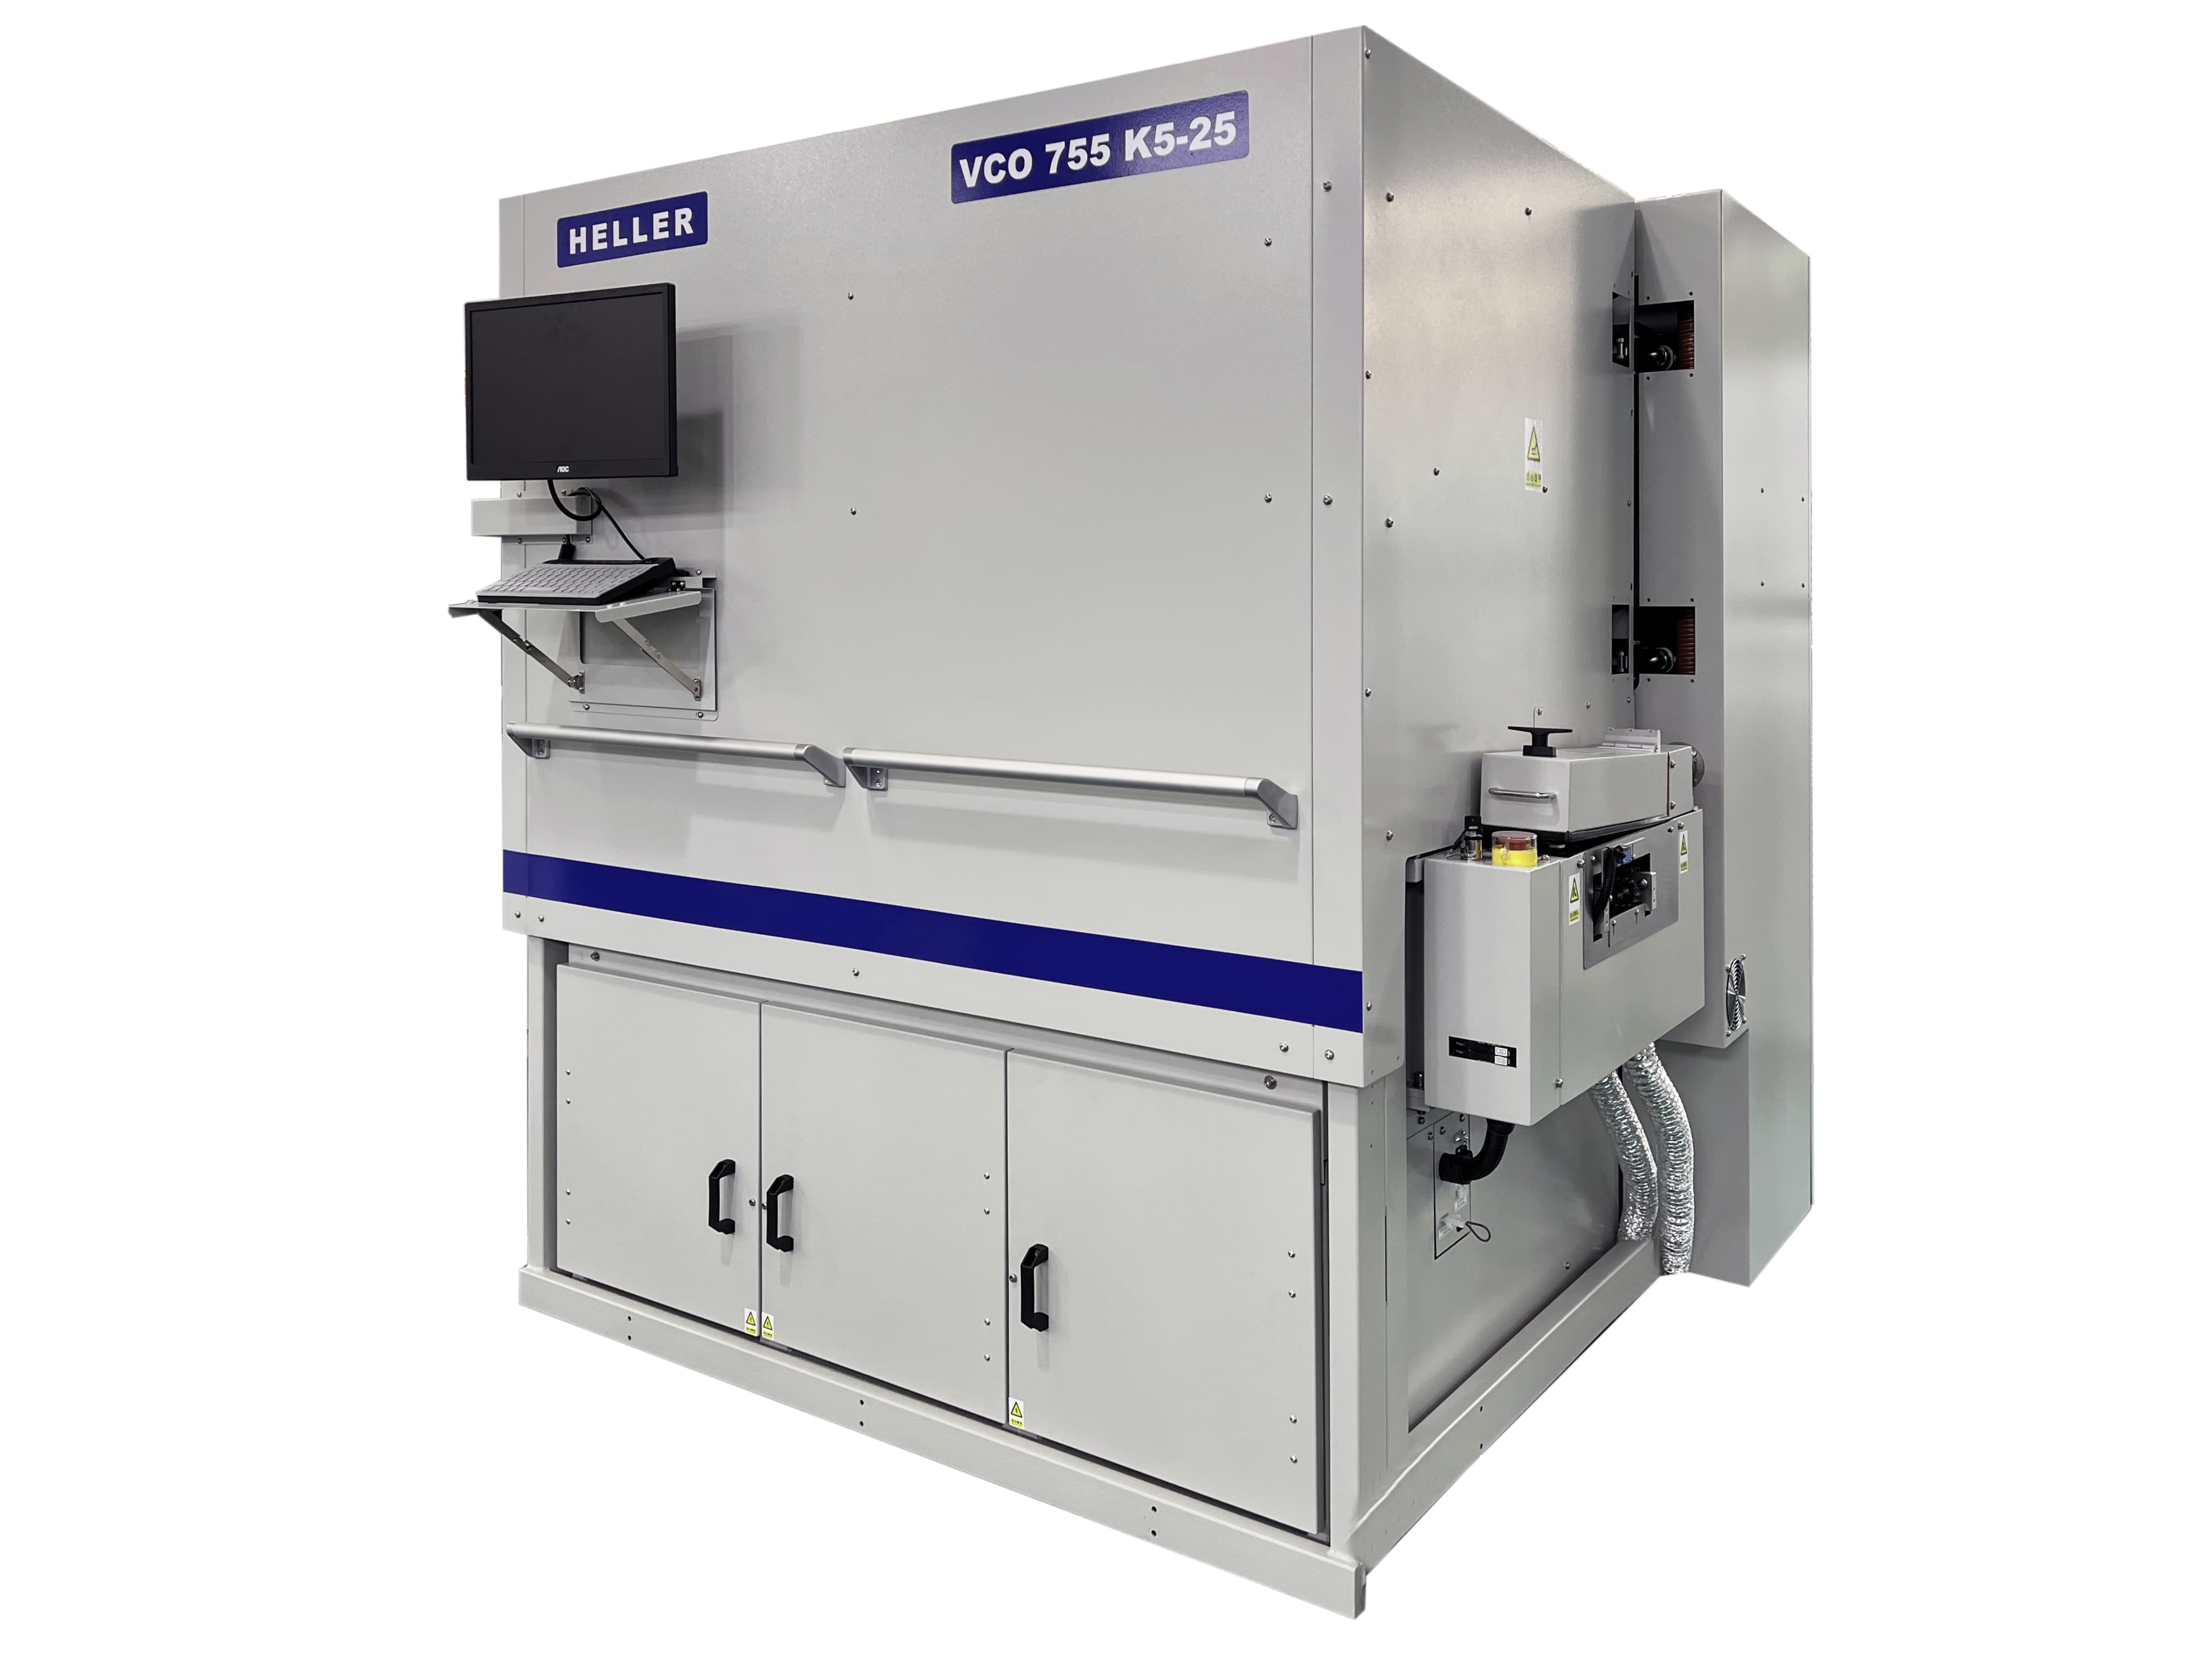 Semi automatic batch pressure curing oven for semiconductor pic